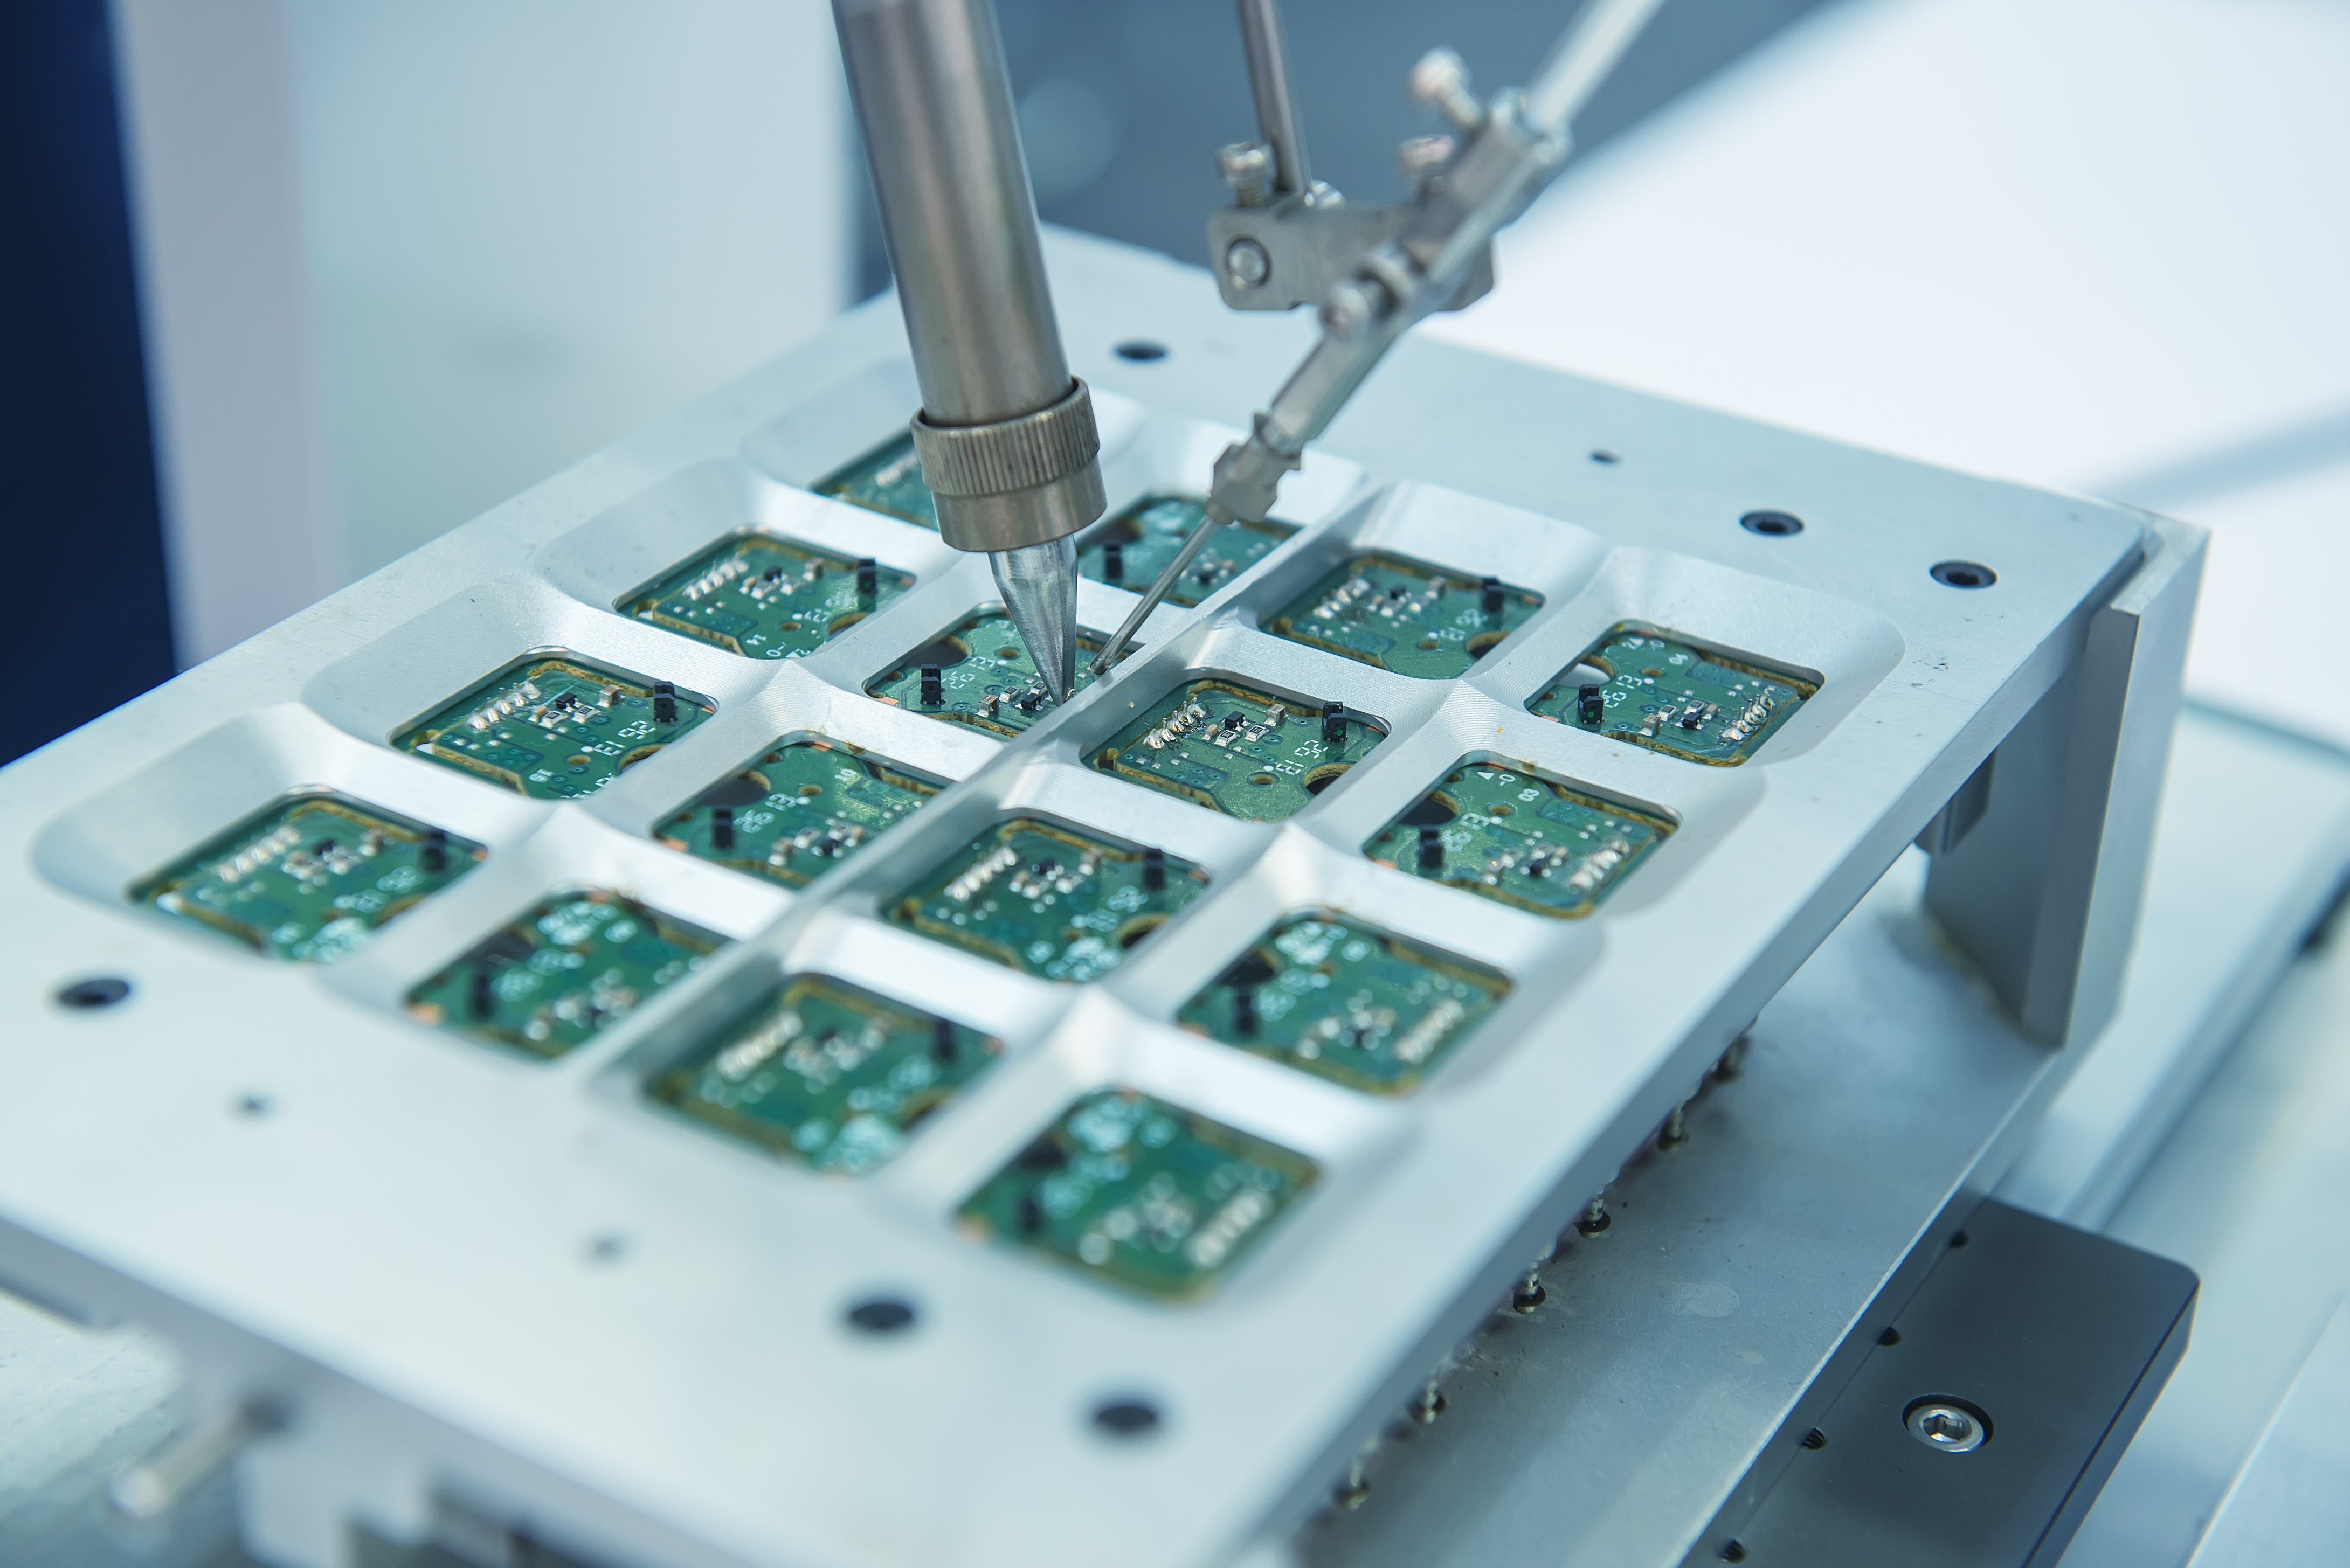 Even traditional PCB process, such as this automated soldering machine, can see the benefits of digital manufacturing.